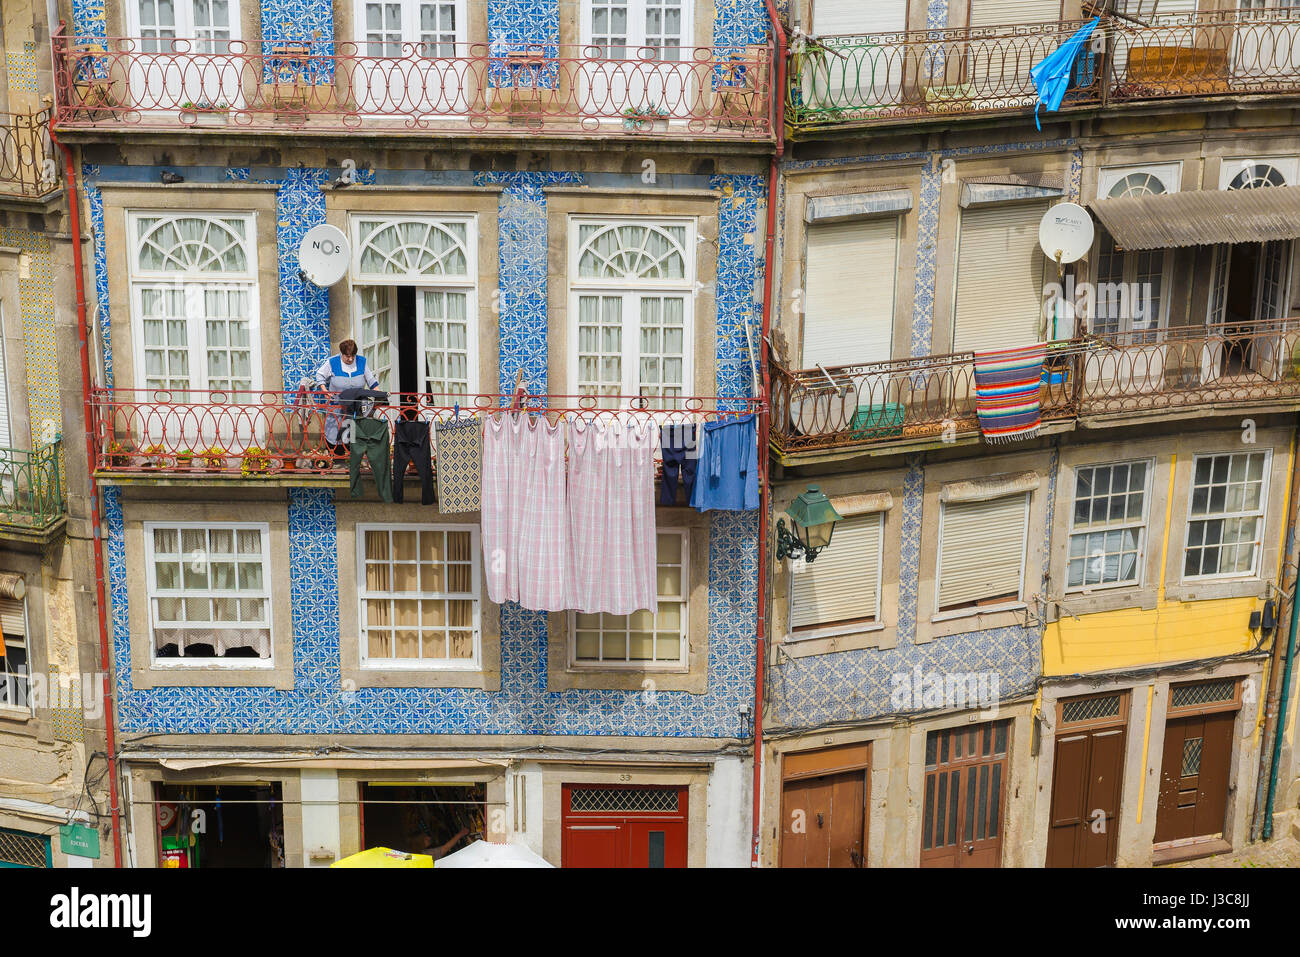 Porto Portugal street, detail of the upper stories of an apartment building decorated with blue azulejos tiles in the old town area of Porto, Portugal Stock Photo